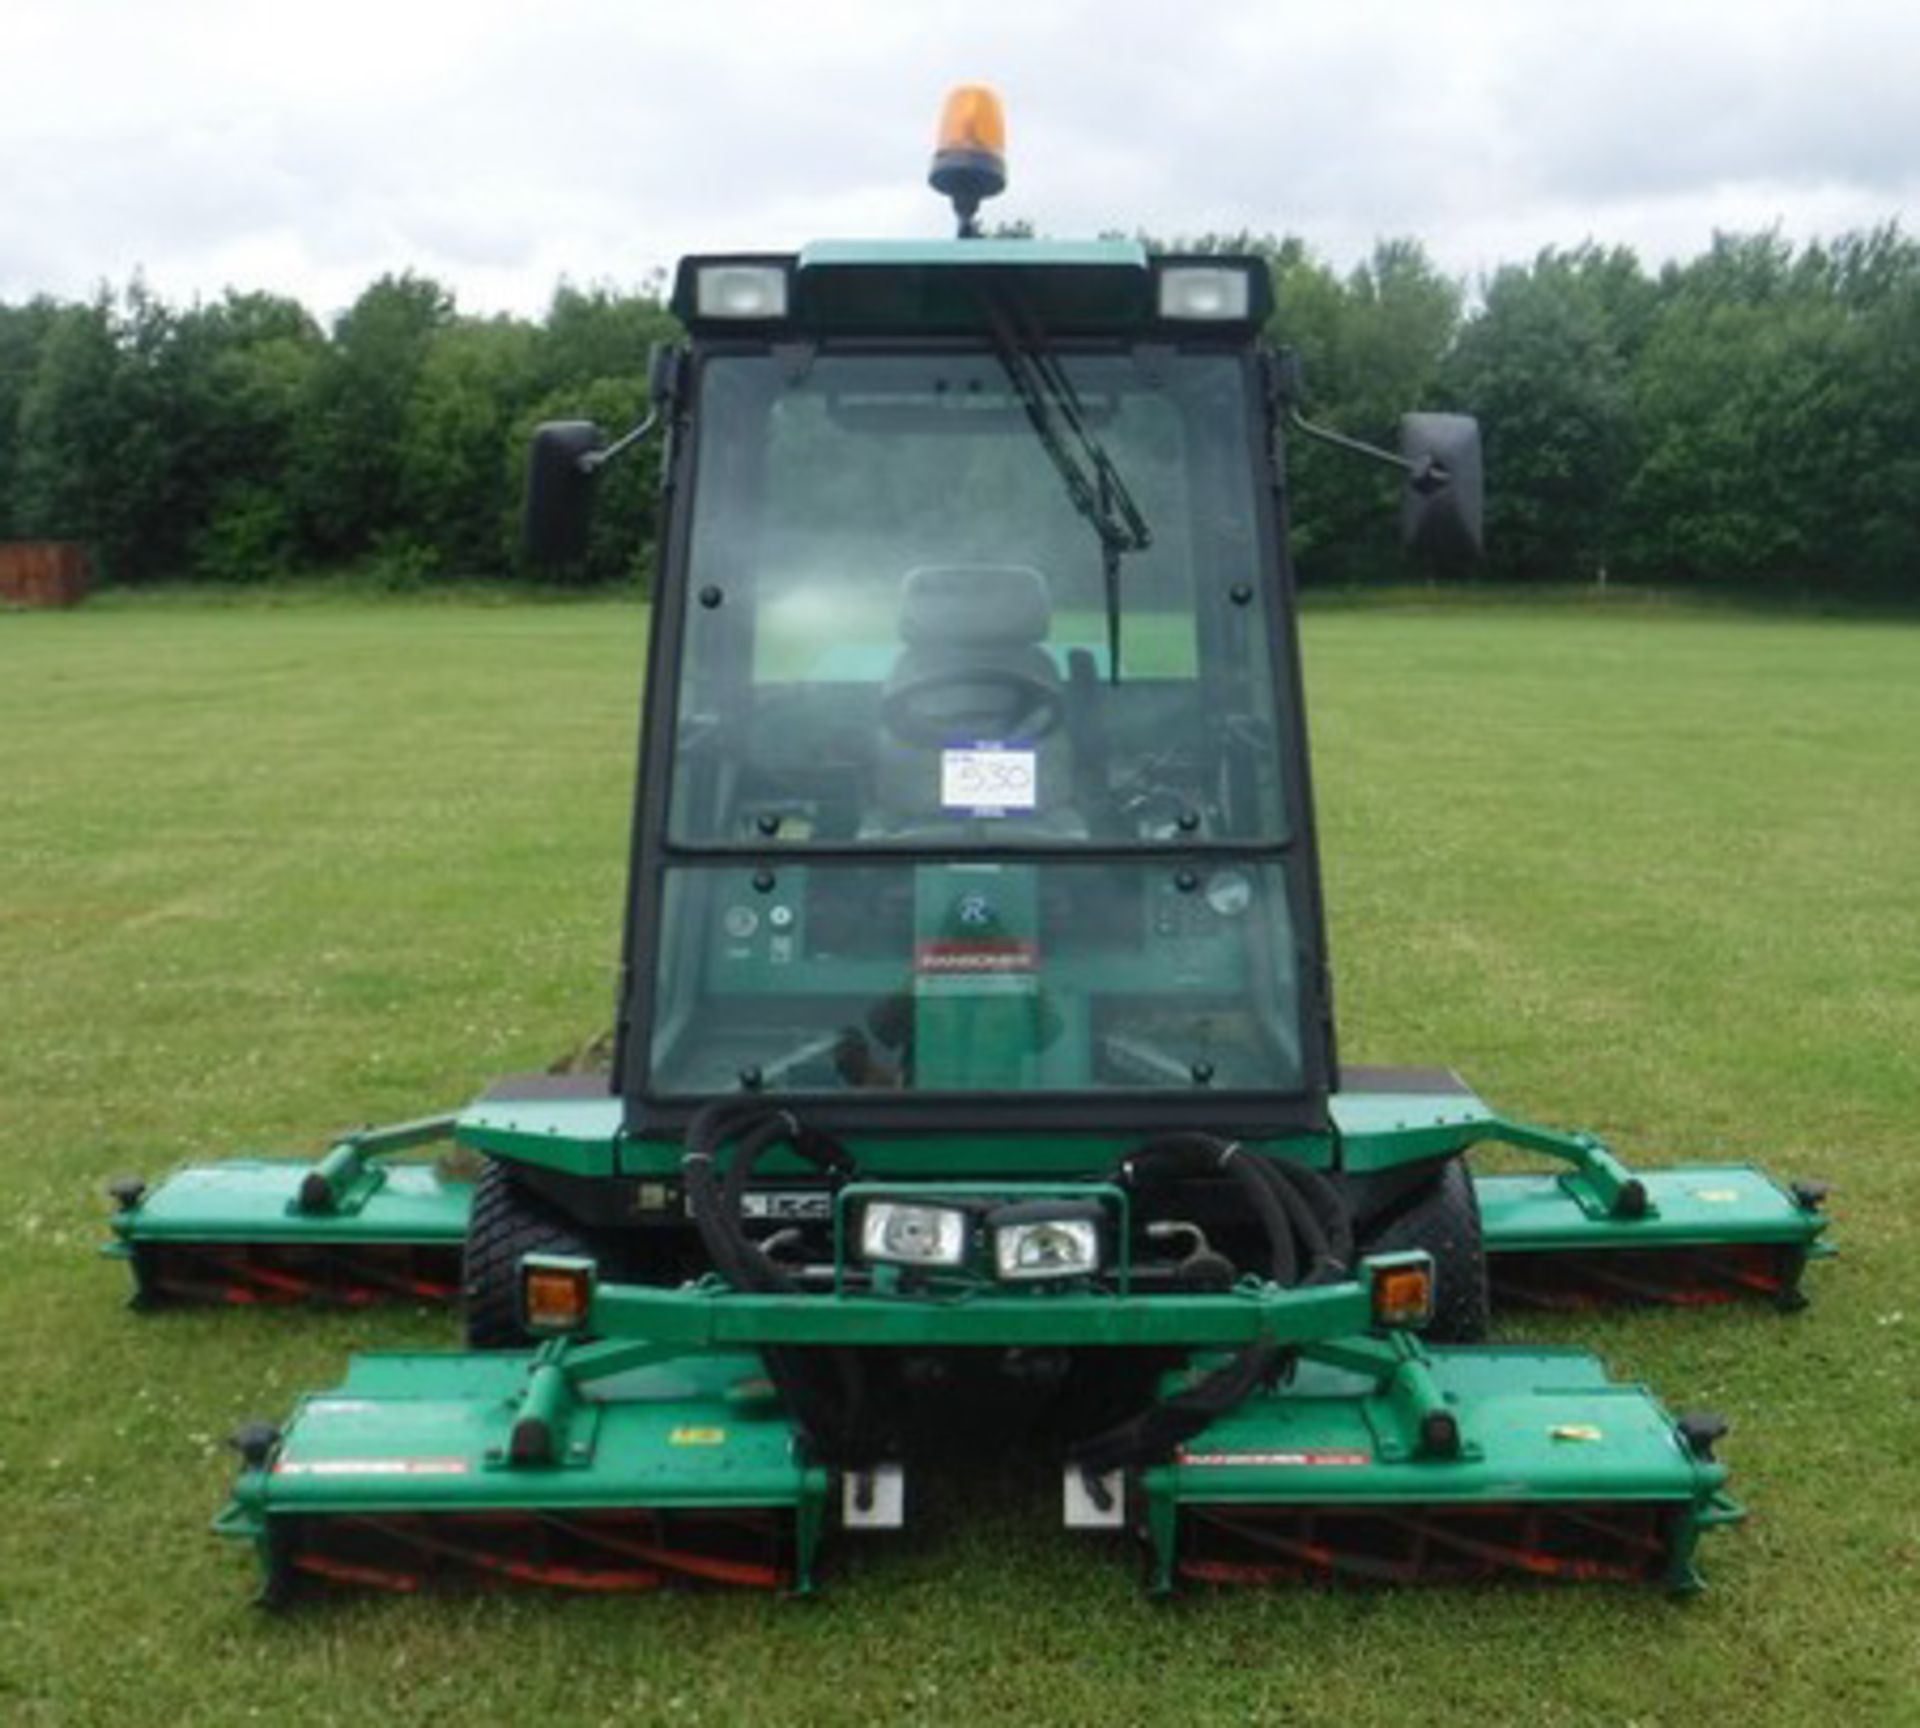 2003 RANSOMES 5 Gang ride on mower. Reg No SN03HLD. 4407hrs (correct) c/w Ransomes safety cab